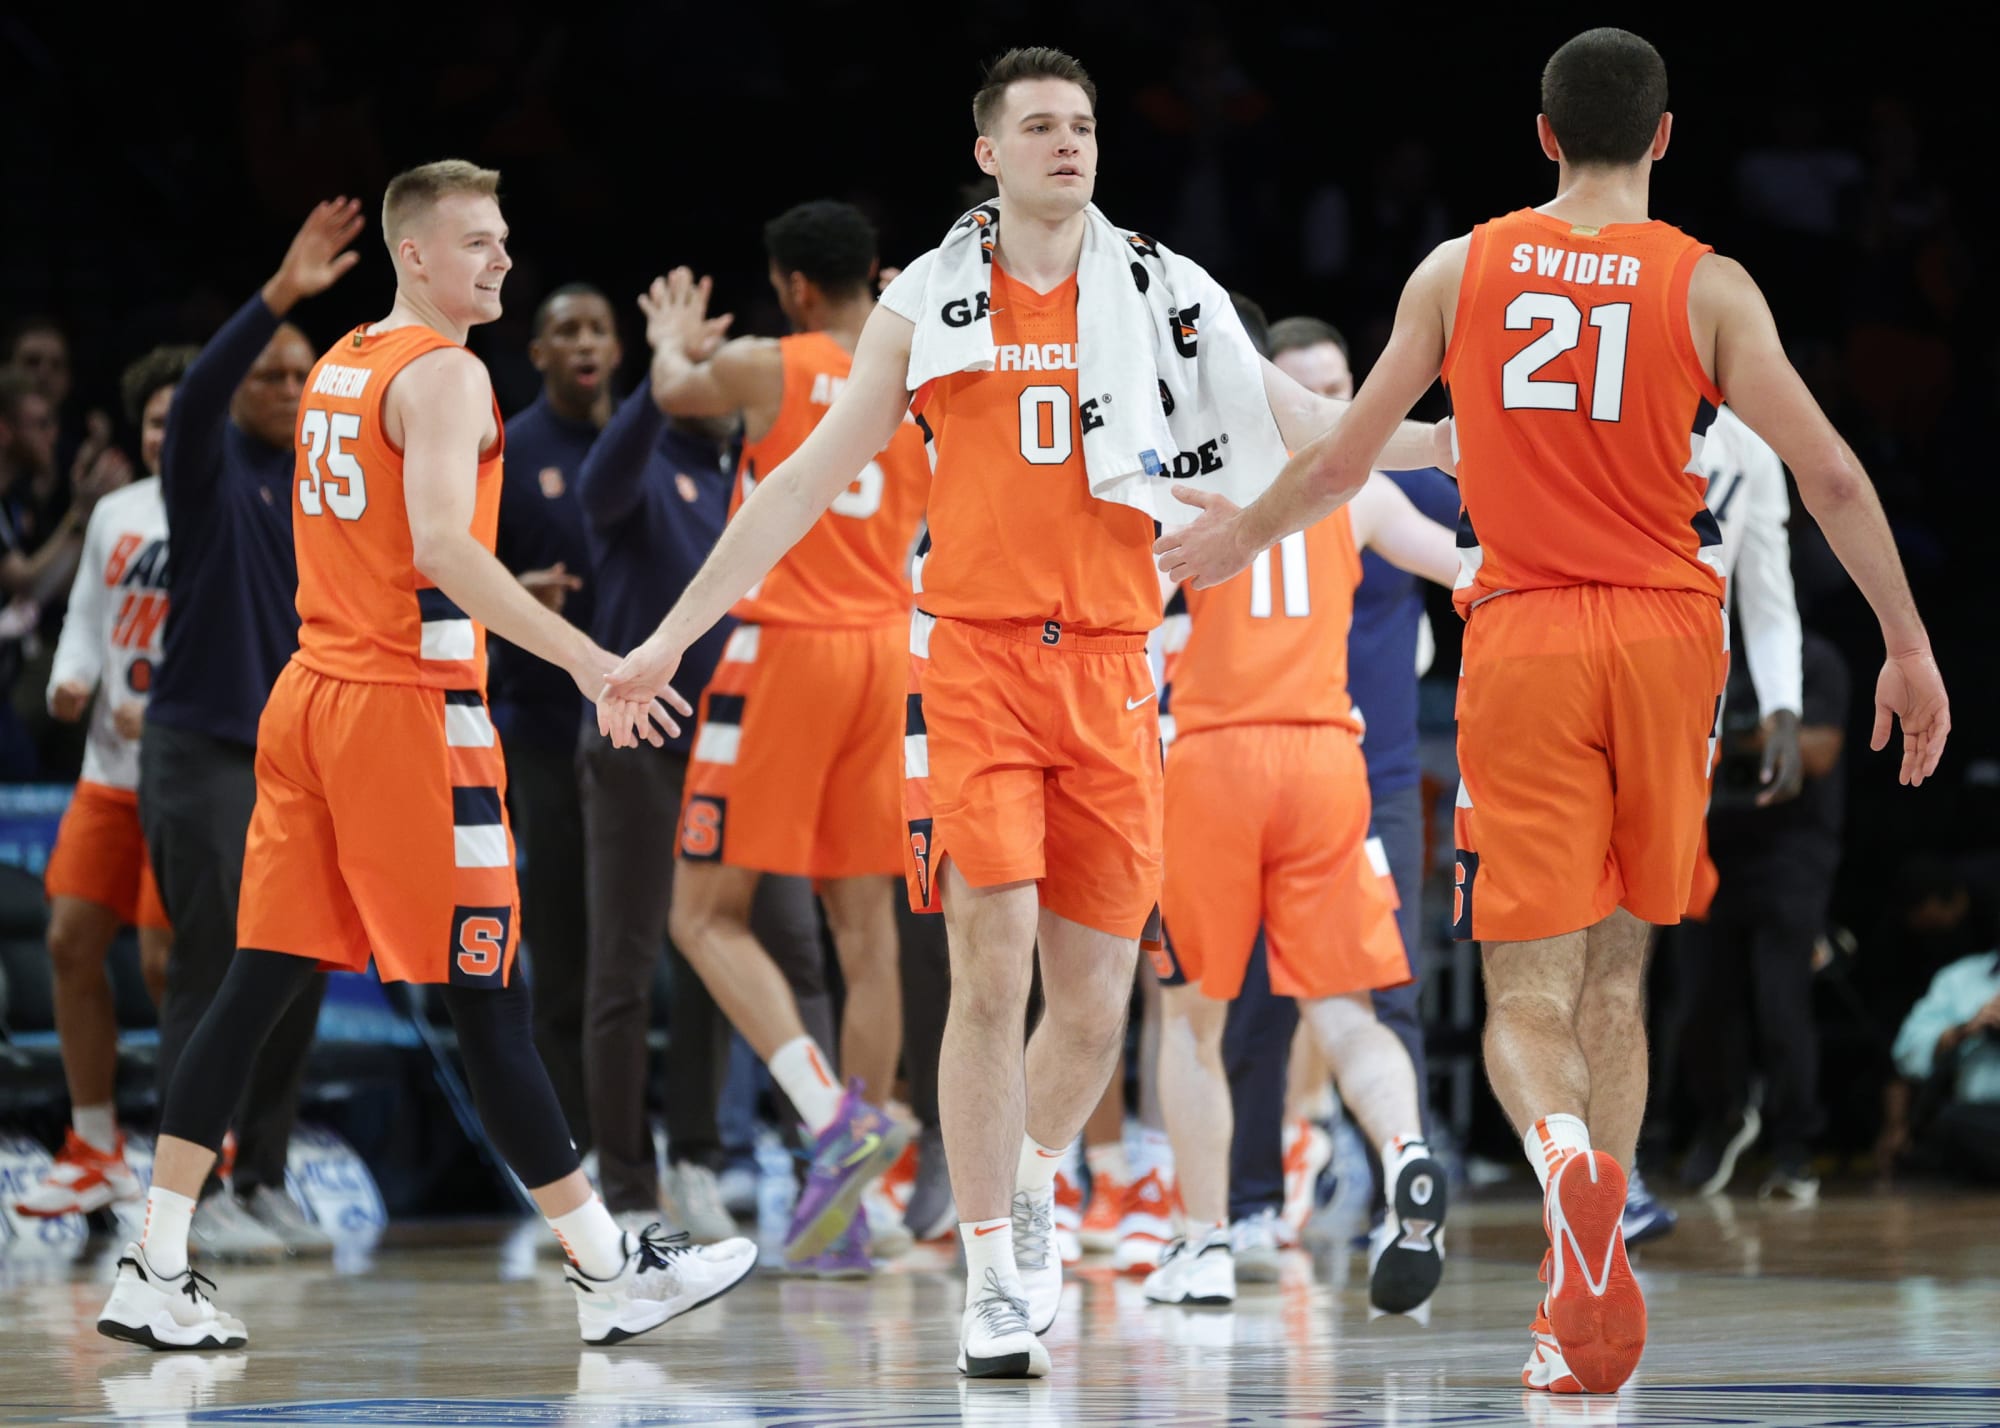 Joseph Estrella wants a second family; that’s what Syracuse basketball is